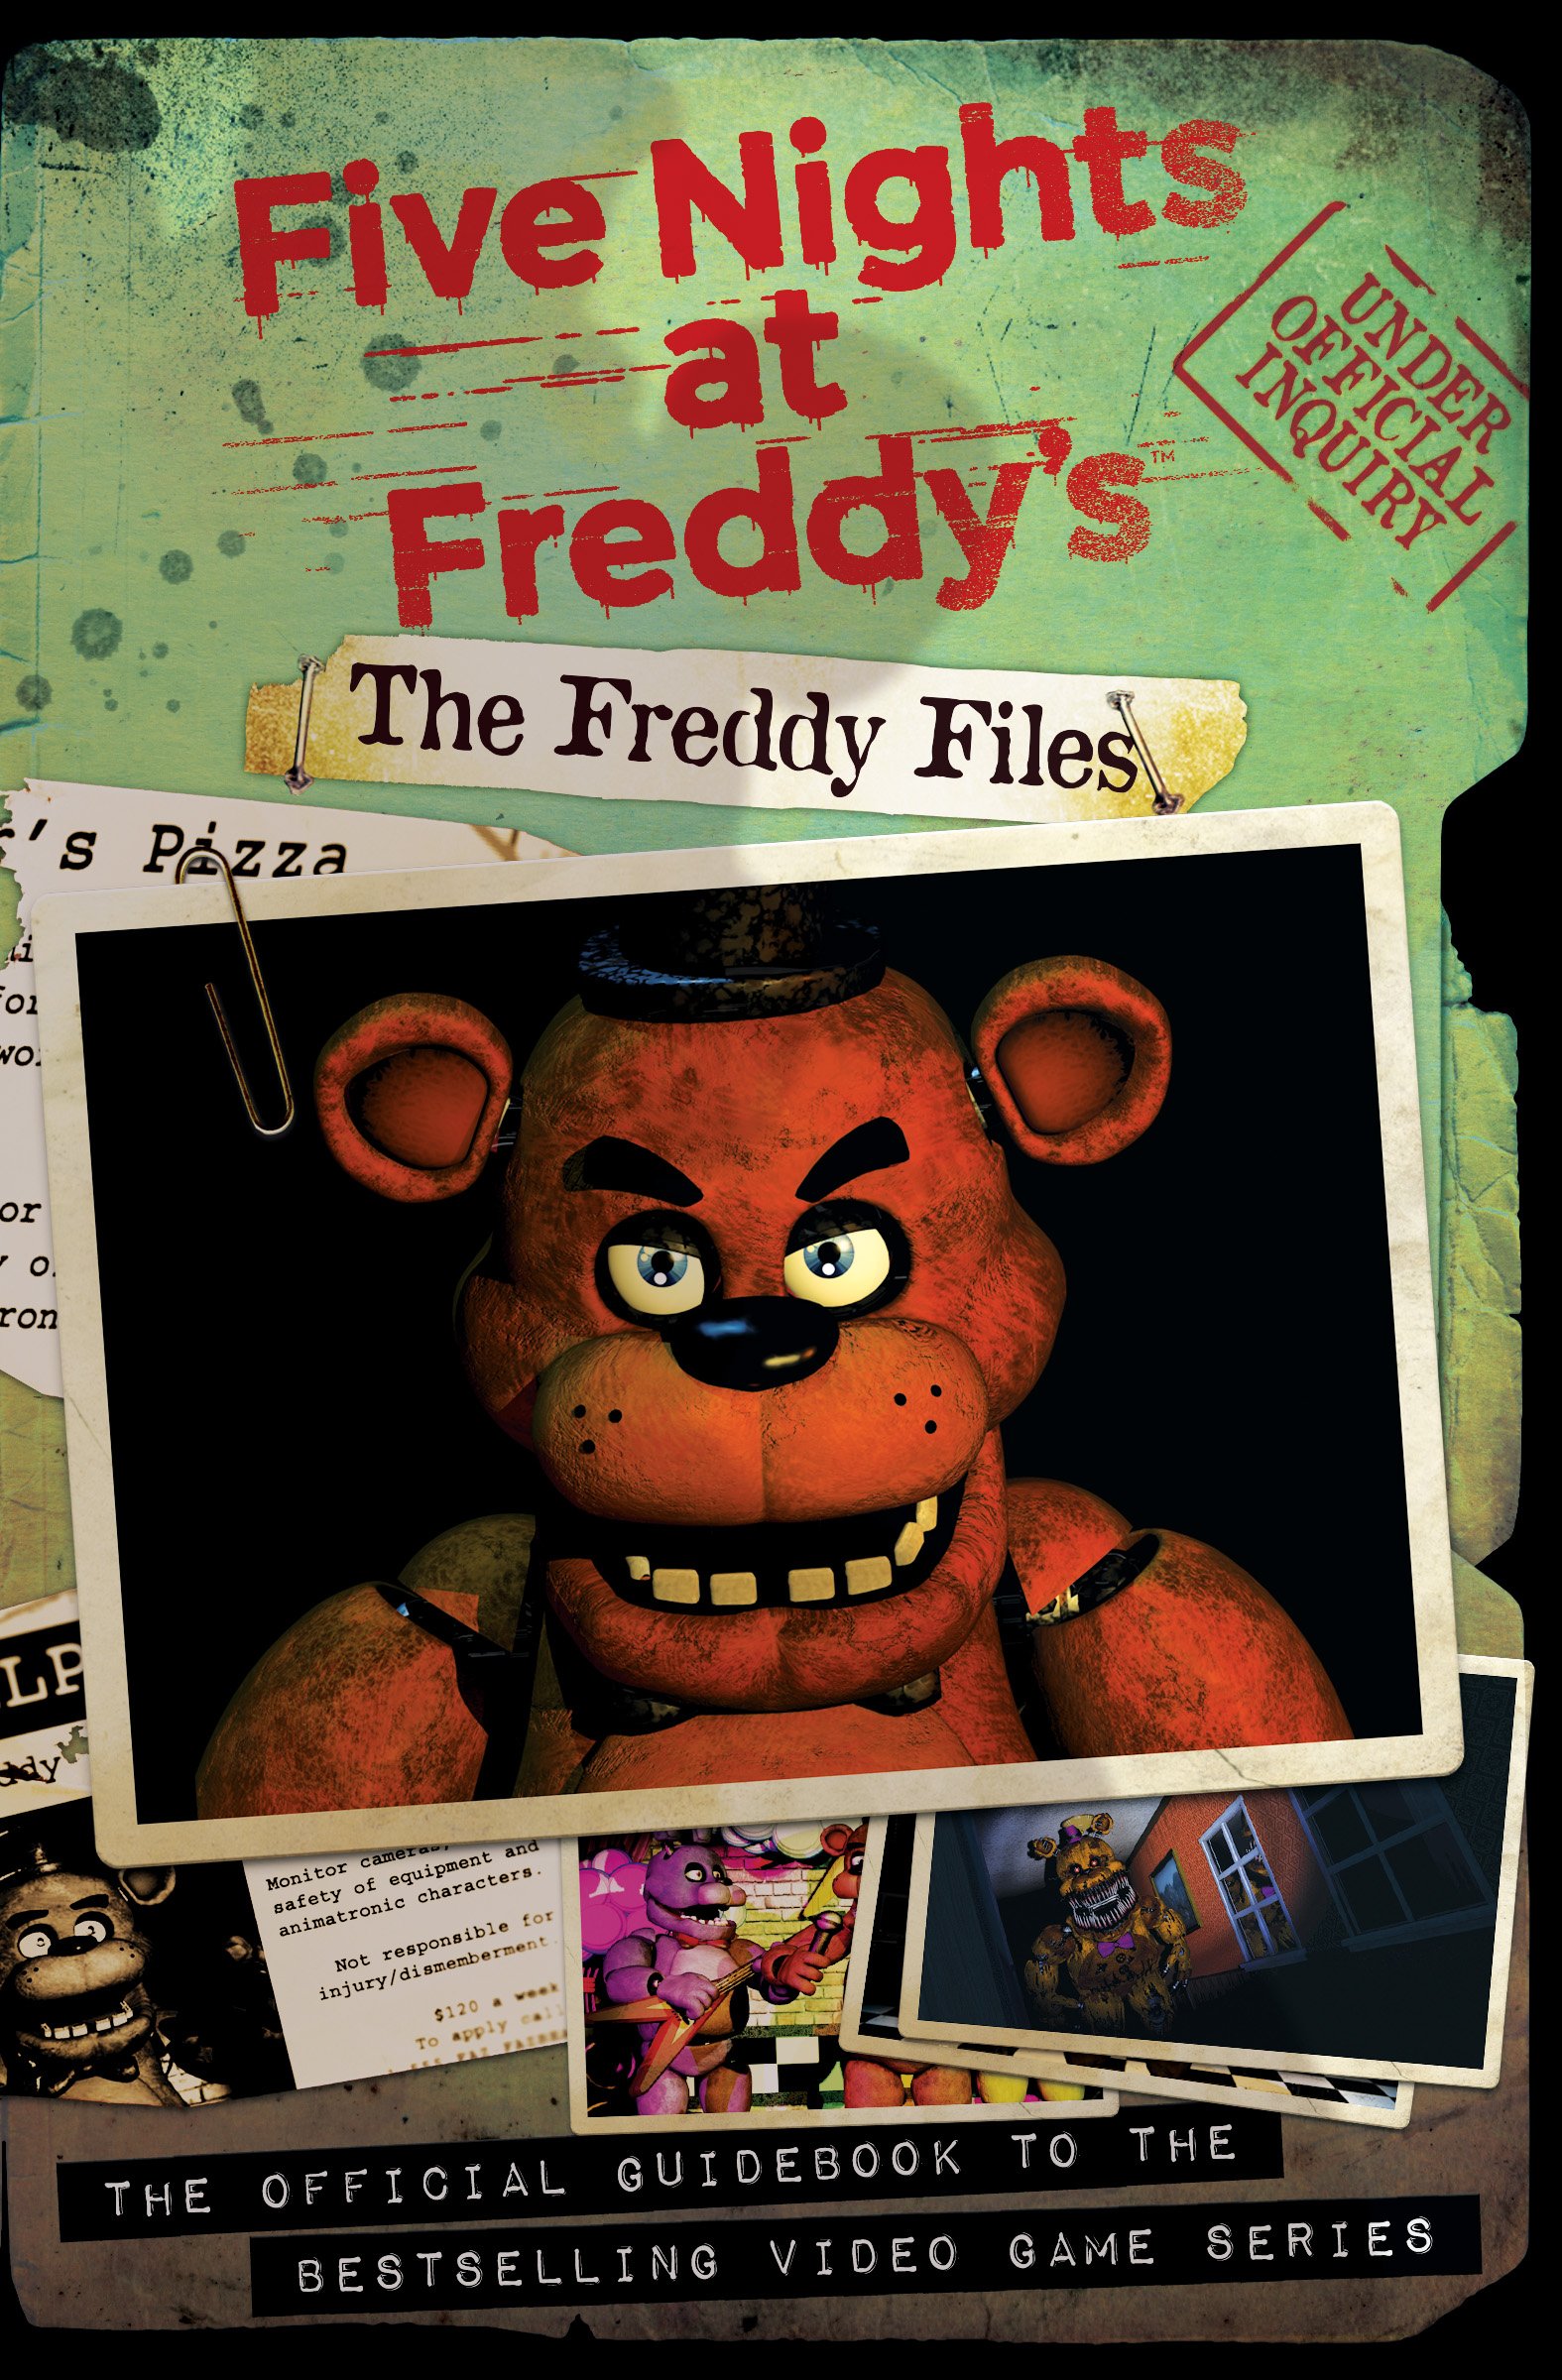 download free fnf five nights at freddy